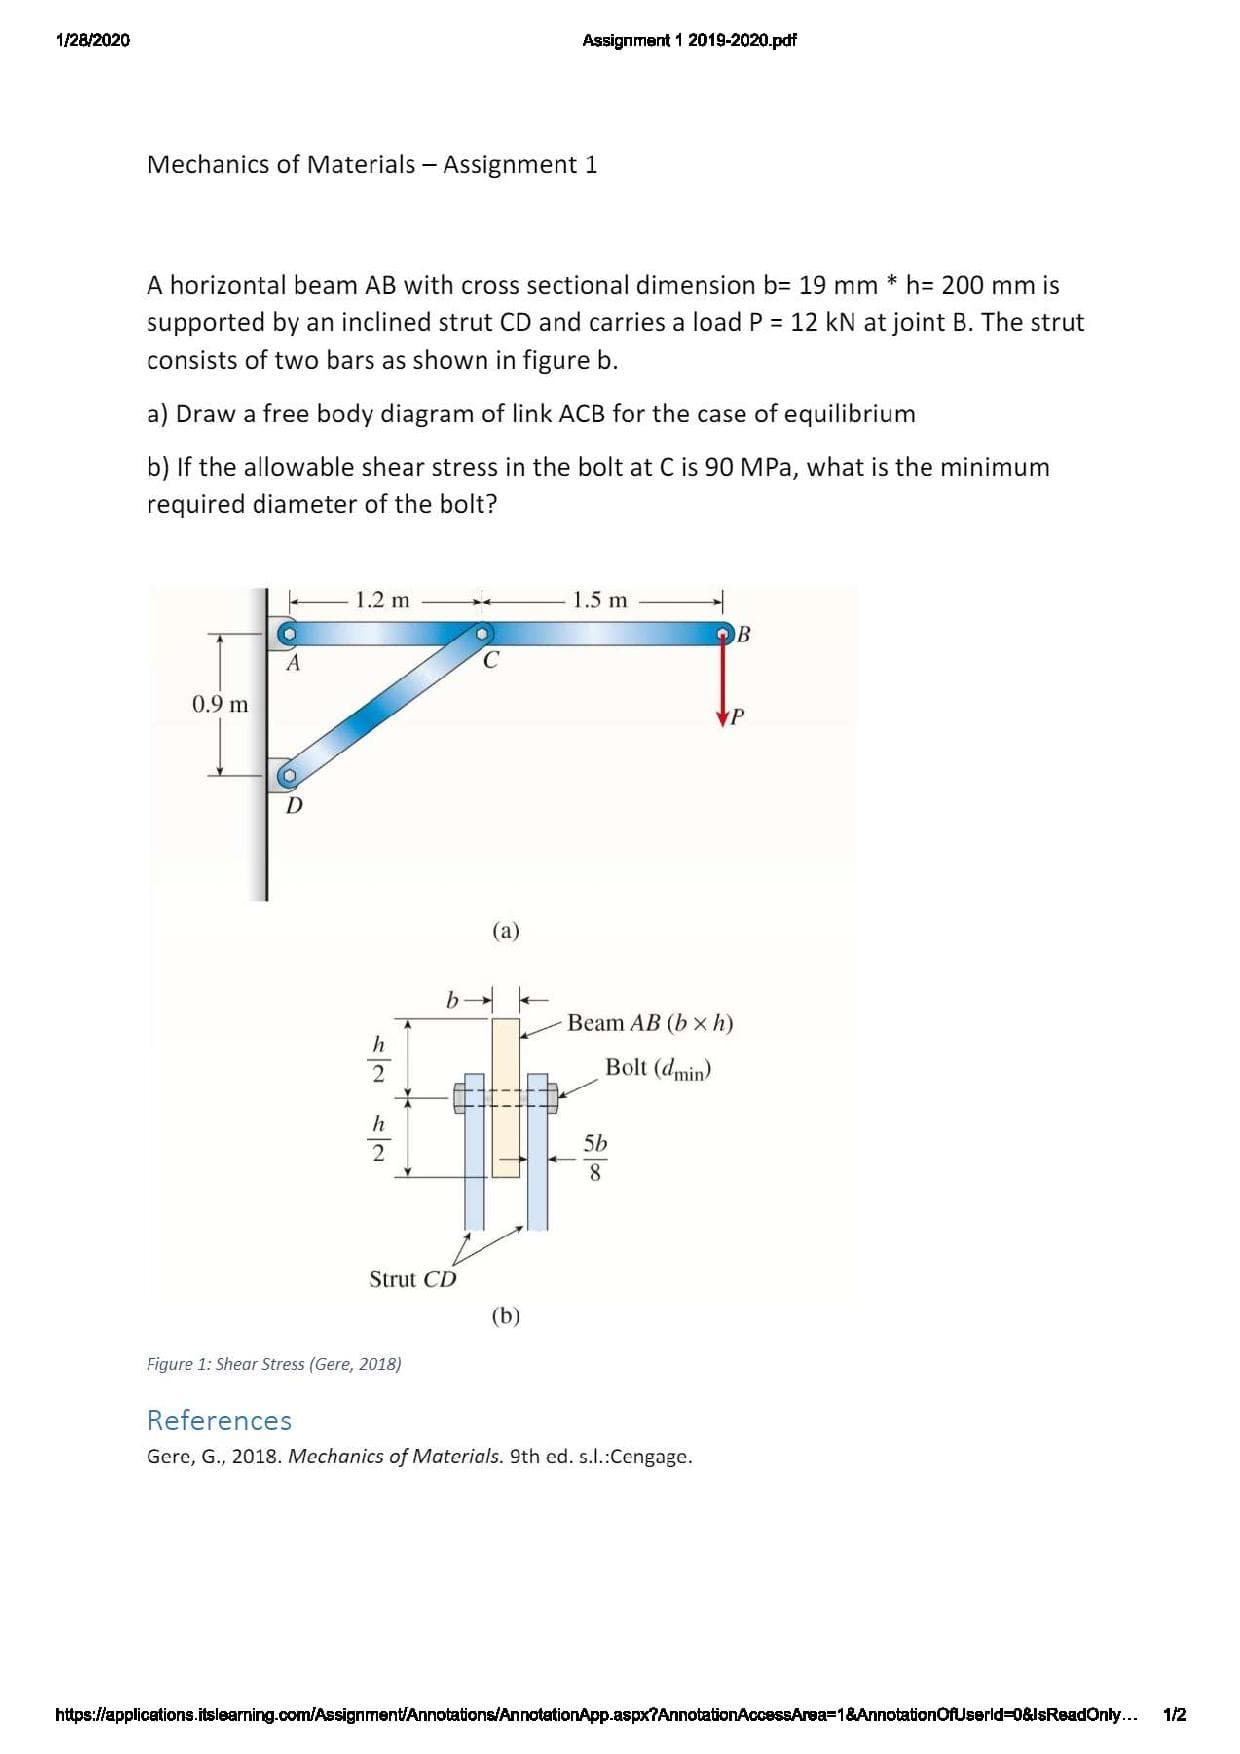 1/28/2020
Assignment 1 2019-2020.pdf
Mechanics of Materials - Assignment 1
A horizontal beam AB with cross sectional dimension b= 19 mm * h= 200 mm is
supported by an inclined strut CD and carries a load P = 12 kN at joint B. The strut
consists of two bars as shown in figure b.
a) Draw a free body diagram of link ACB for the case of equilibrium
b) If the allowable shear stress in the bolt at C is 90 MPa, what is the minimum
required diameter of the bolt?
1.2 m
1.5 m
0.9 m
(a)
Beam AB (b xh)
Bolt (dmin)
5b
8.
Strut CD
(b)
Figure 1: Shear Stress (Gere, 2018)
References
Gere, G., 2018. Mechanics of Materials. 9th ed. s.:Cengage.
https://applications.itslearning.com/Assignment/Annotations/AnnotationApp.aspx?AnnotationAccessArea=1&AnnotationOfUserld%3D0&IsReadOny...
1/2
一2
